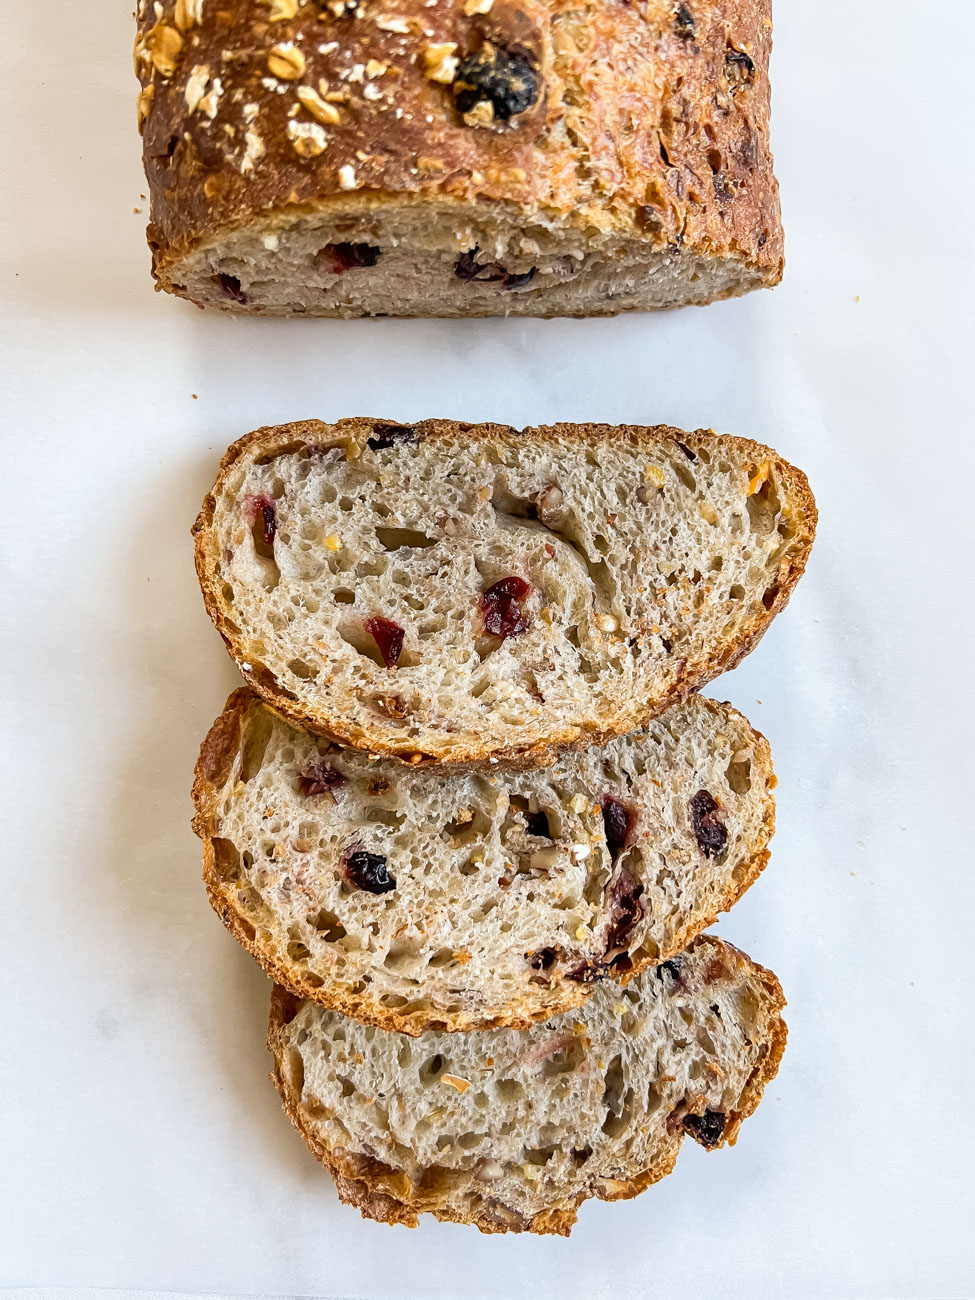 wildgrain reviews : cranberry pecan loaf of bread and slices of bread.